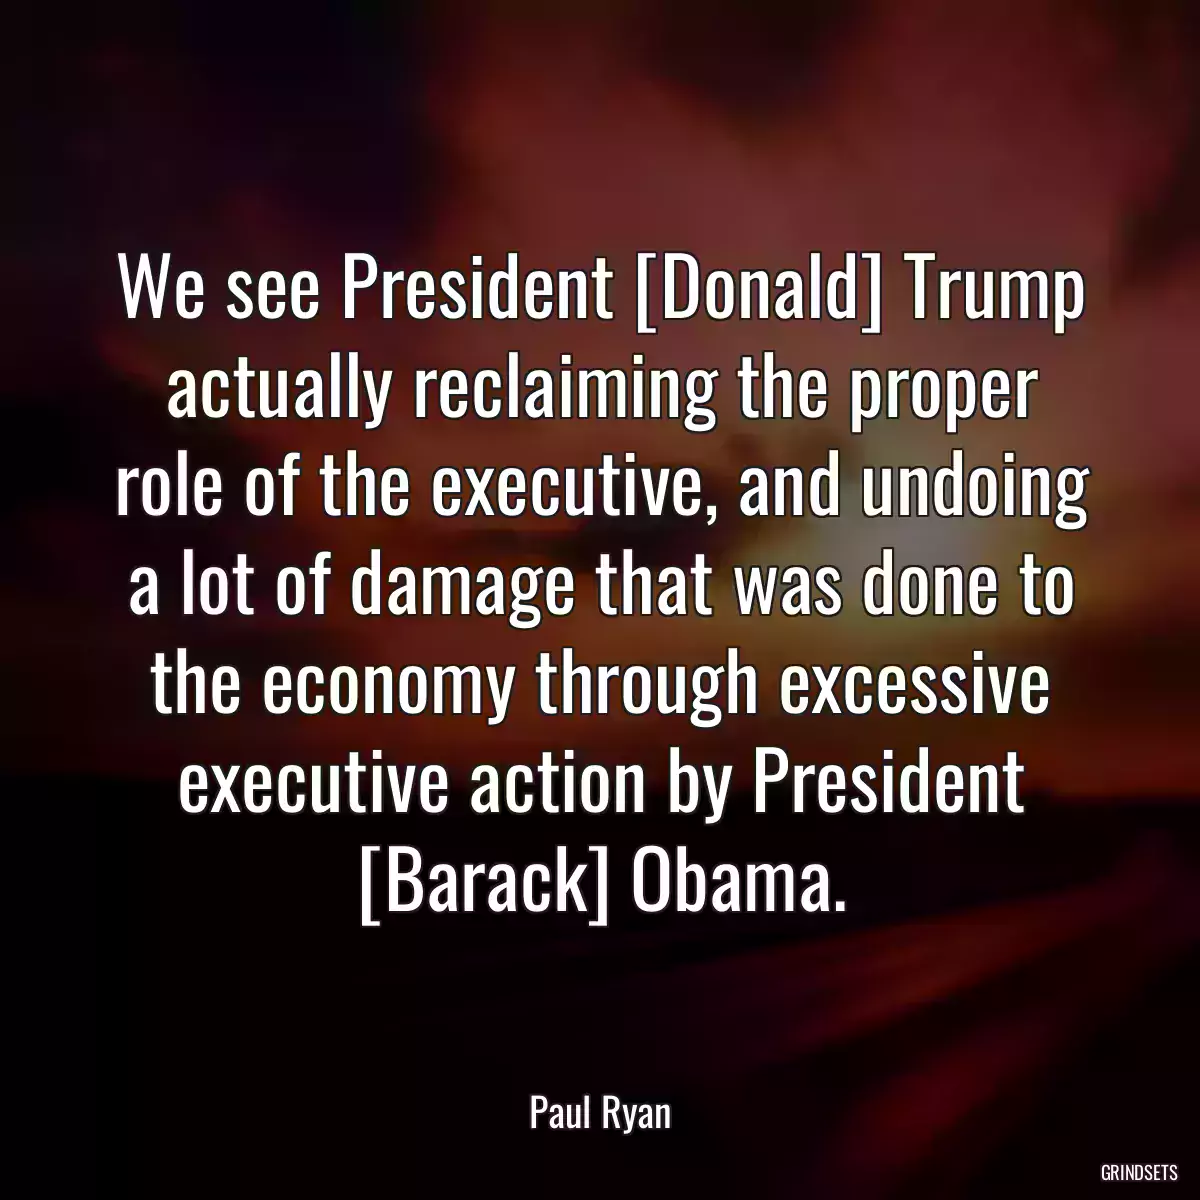 We see President [Donald] Trump actually reclaiming the proper role of the executive, and undoing a lot of damage that was done to the economy through excessive executive action by President [Barack] Obama.